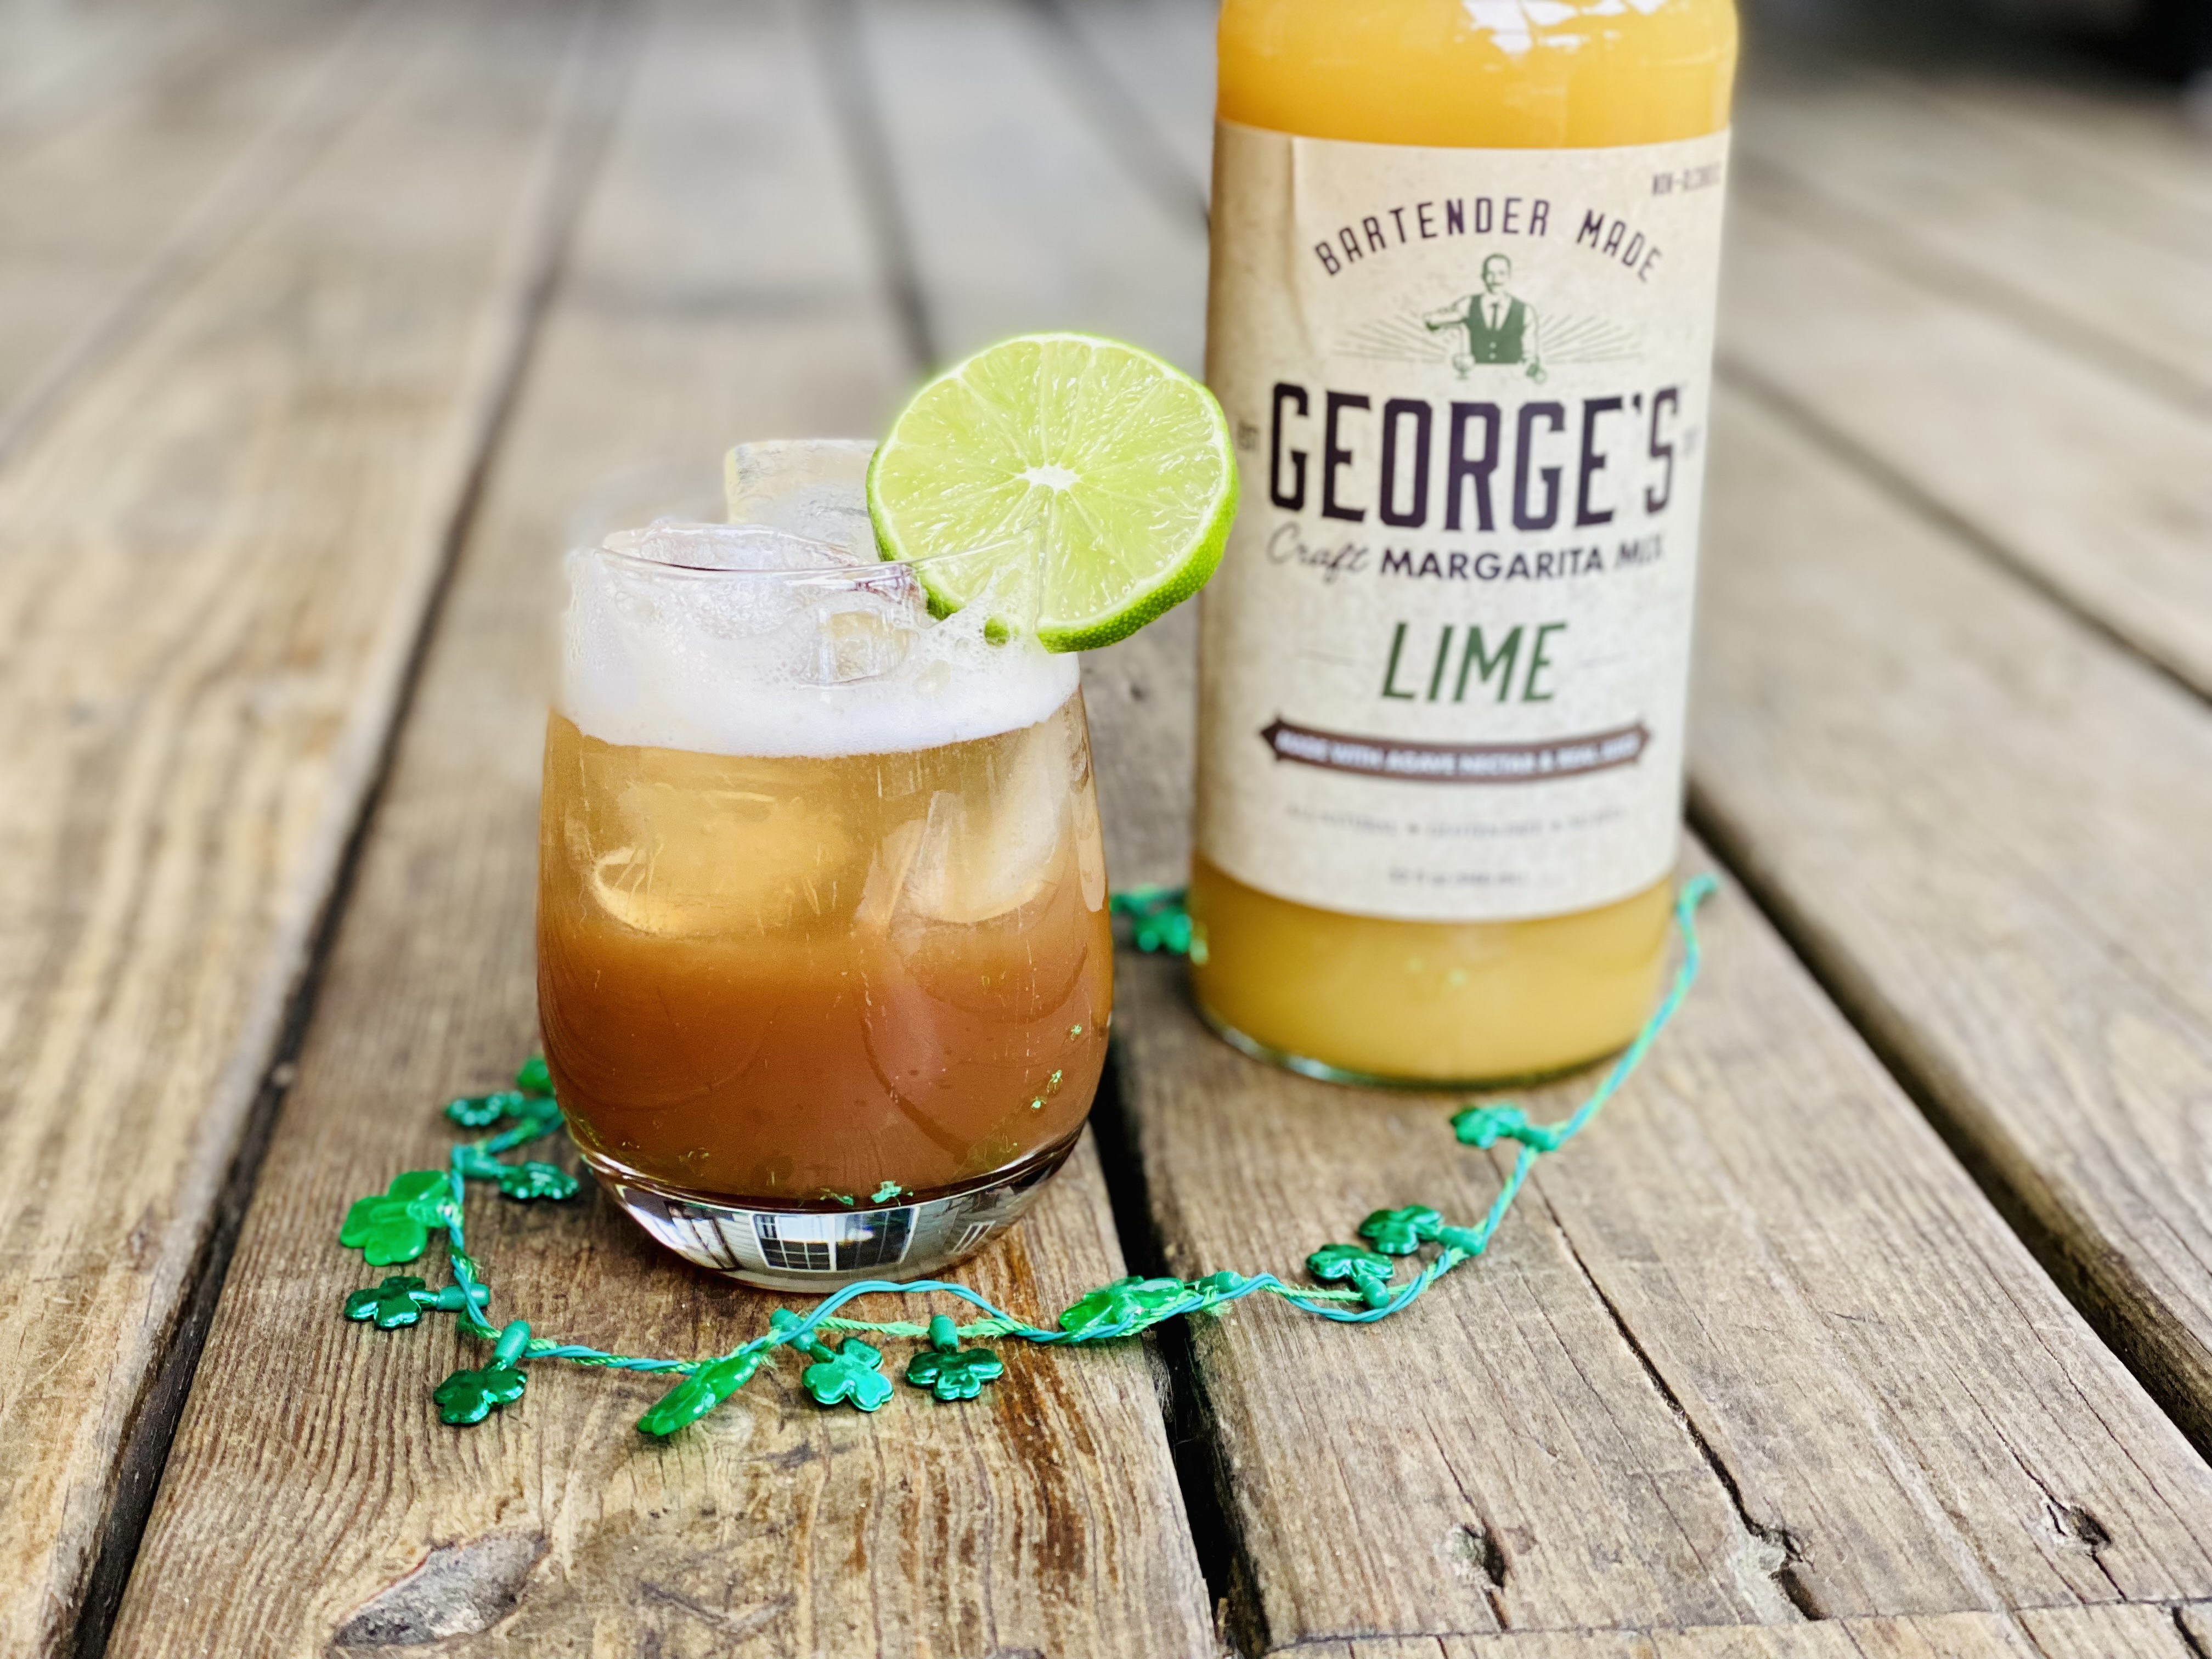 GEORGE'S Irish Rose cocktail with green shamrock beads and GEORGE'S lime margarita mix